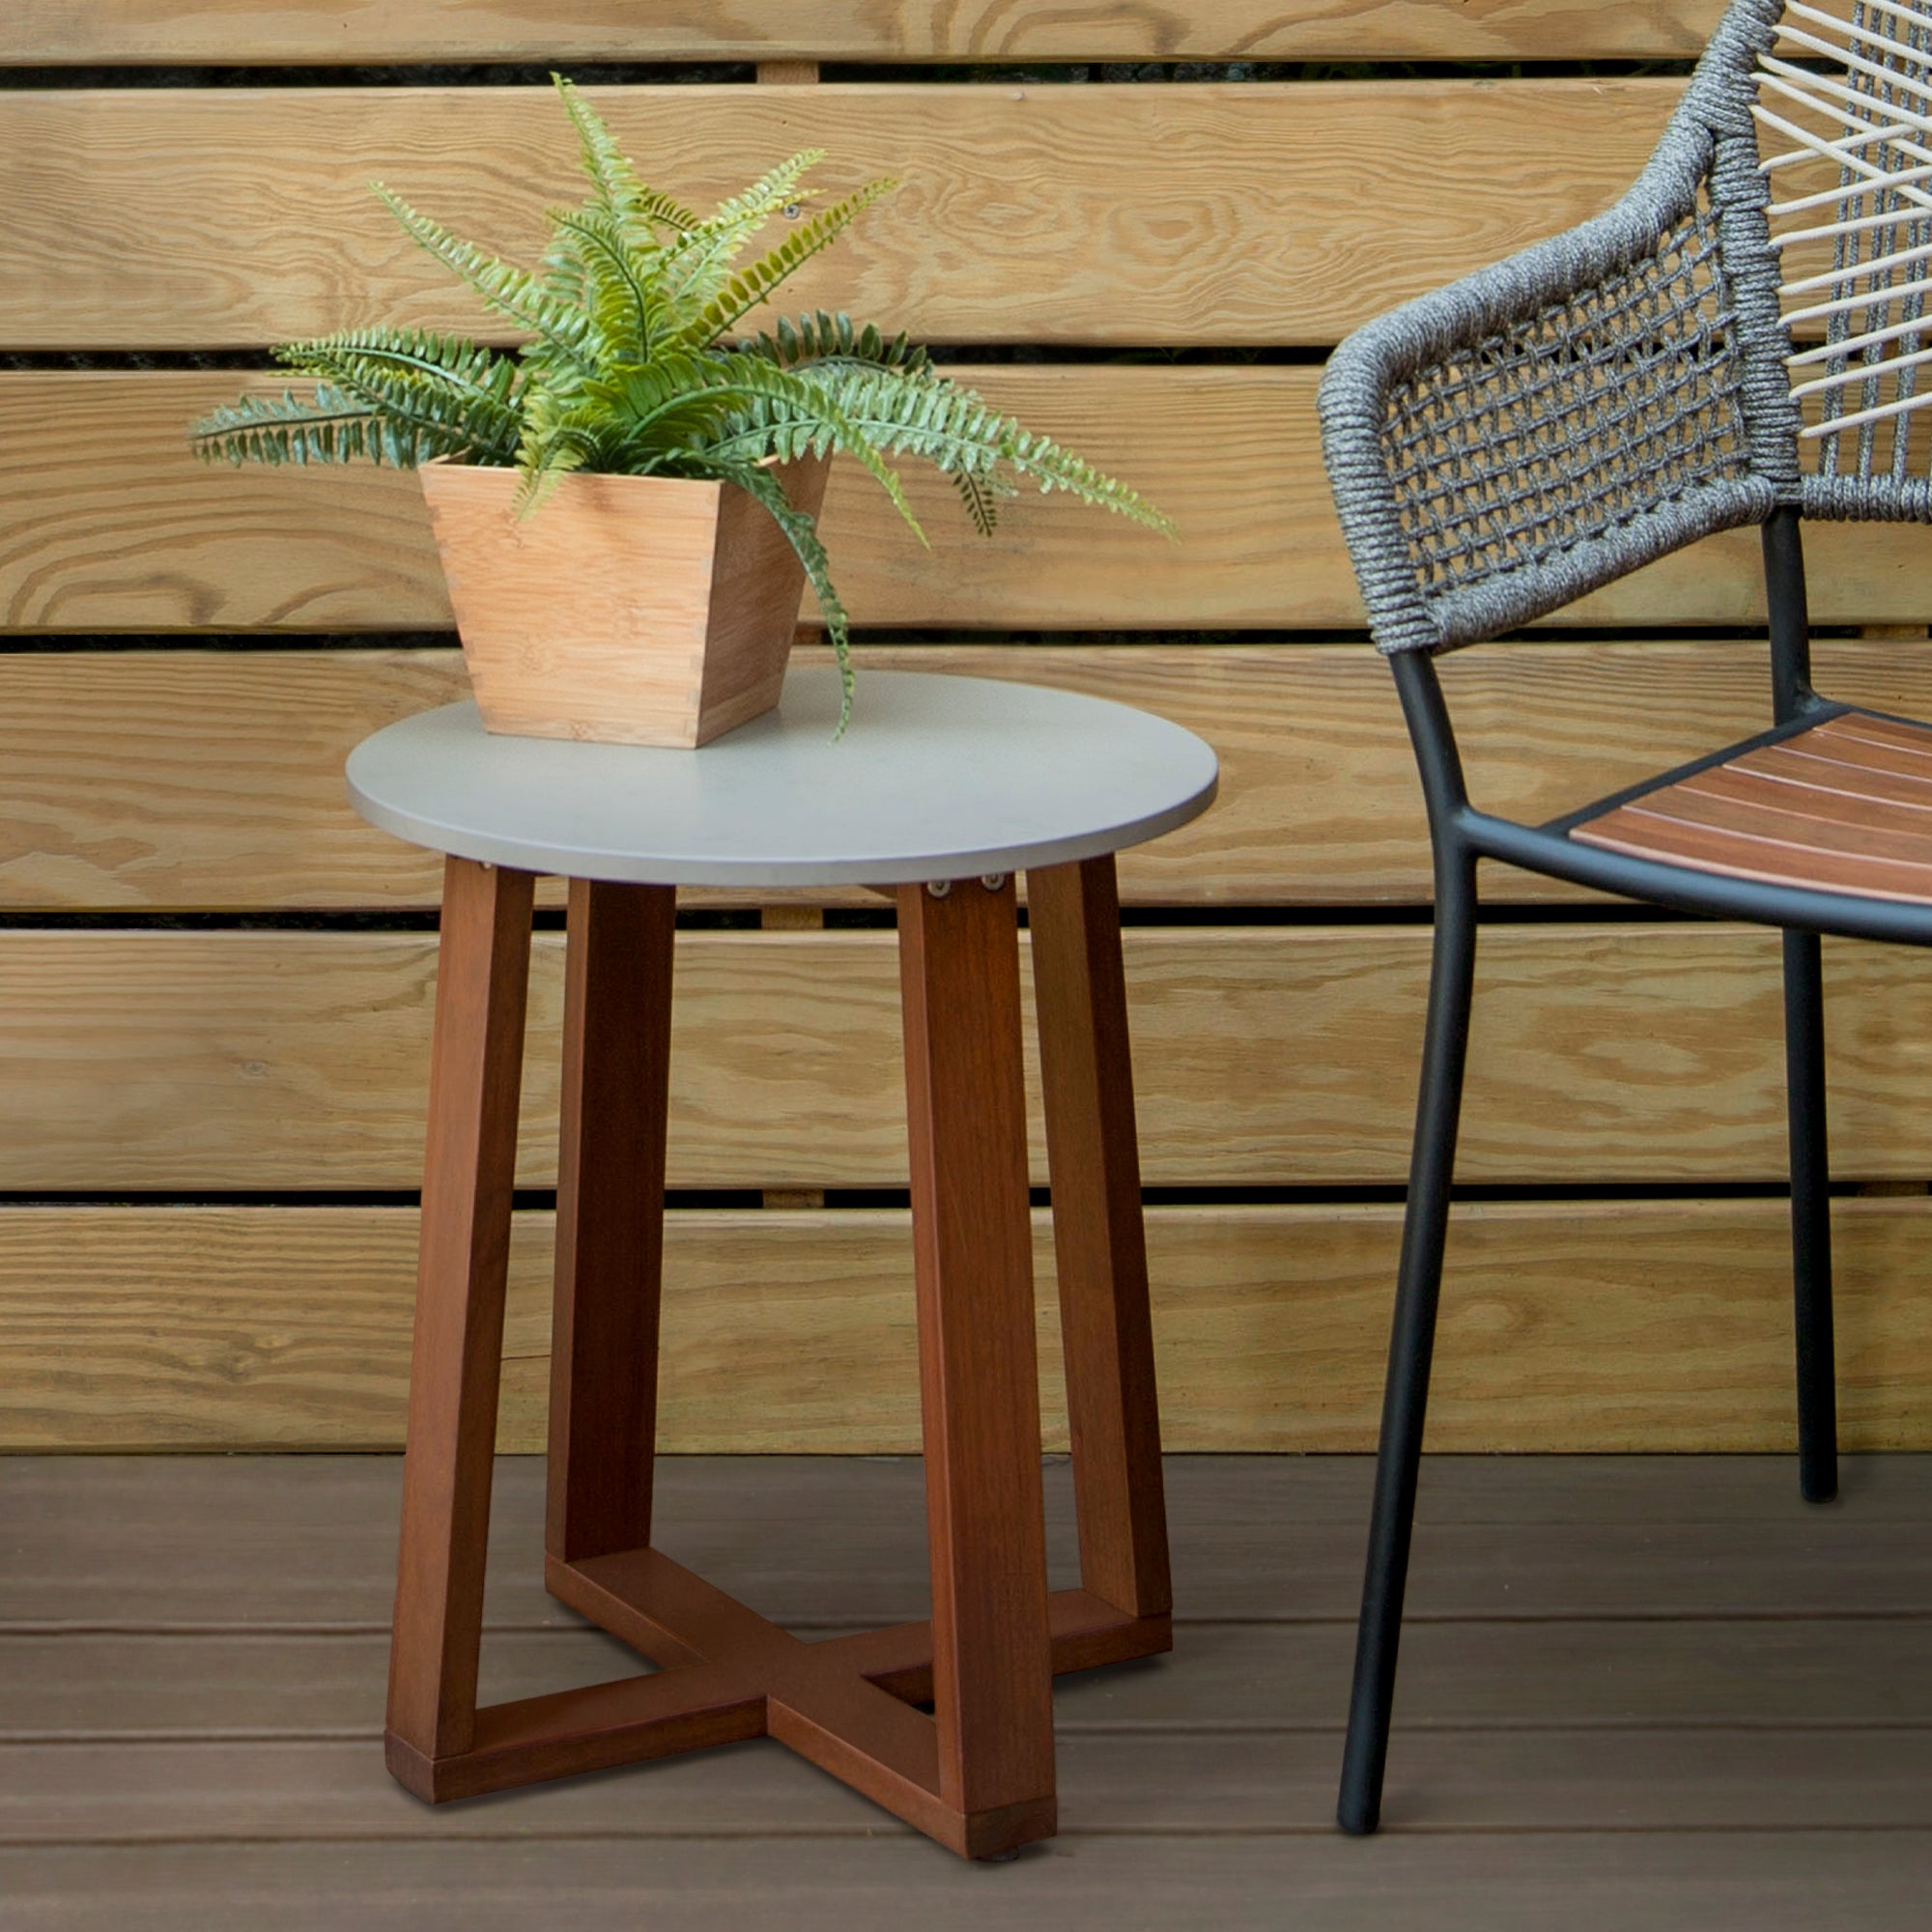 Solid Eucalyptus Wood Patio Side Table with Superstone Top is pictured outside.